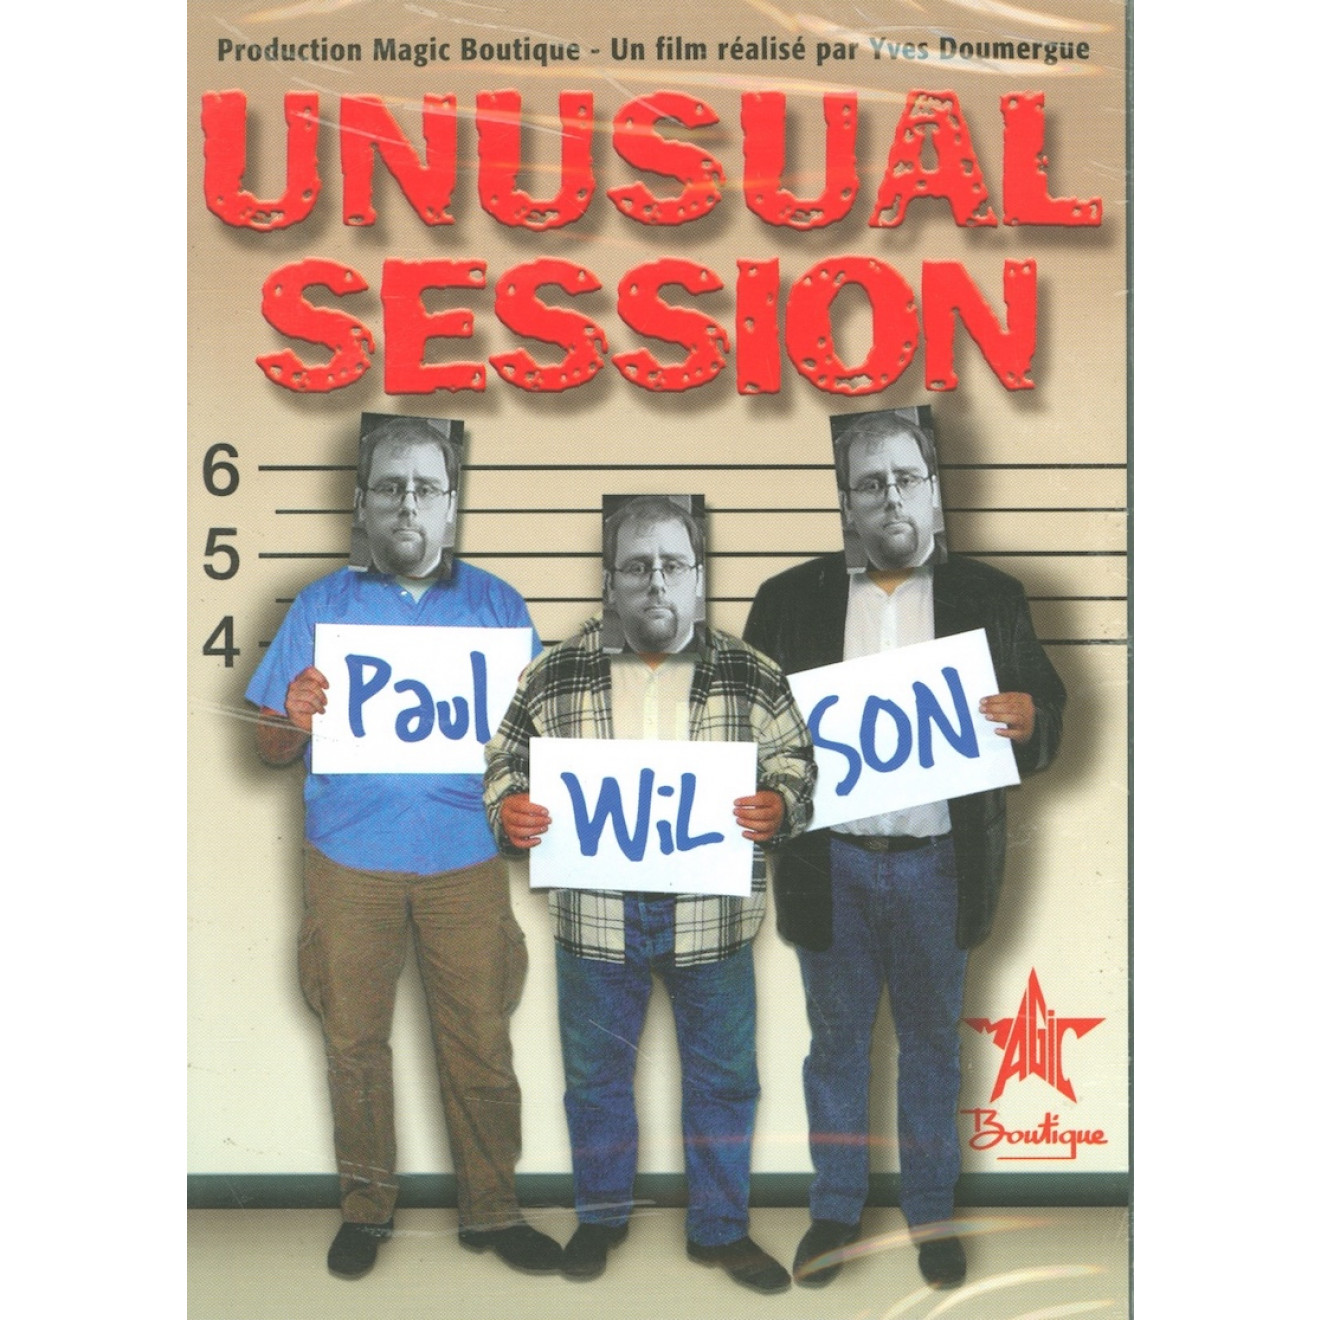 Unusual Session by Paul Wilson - DVD